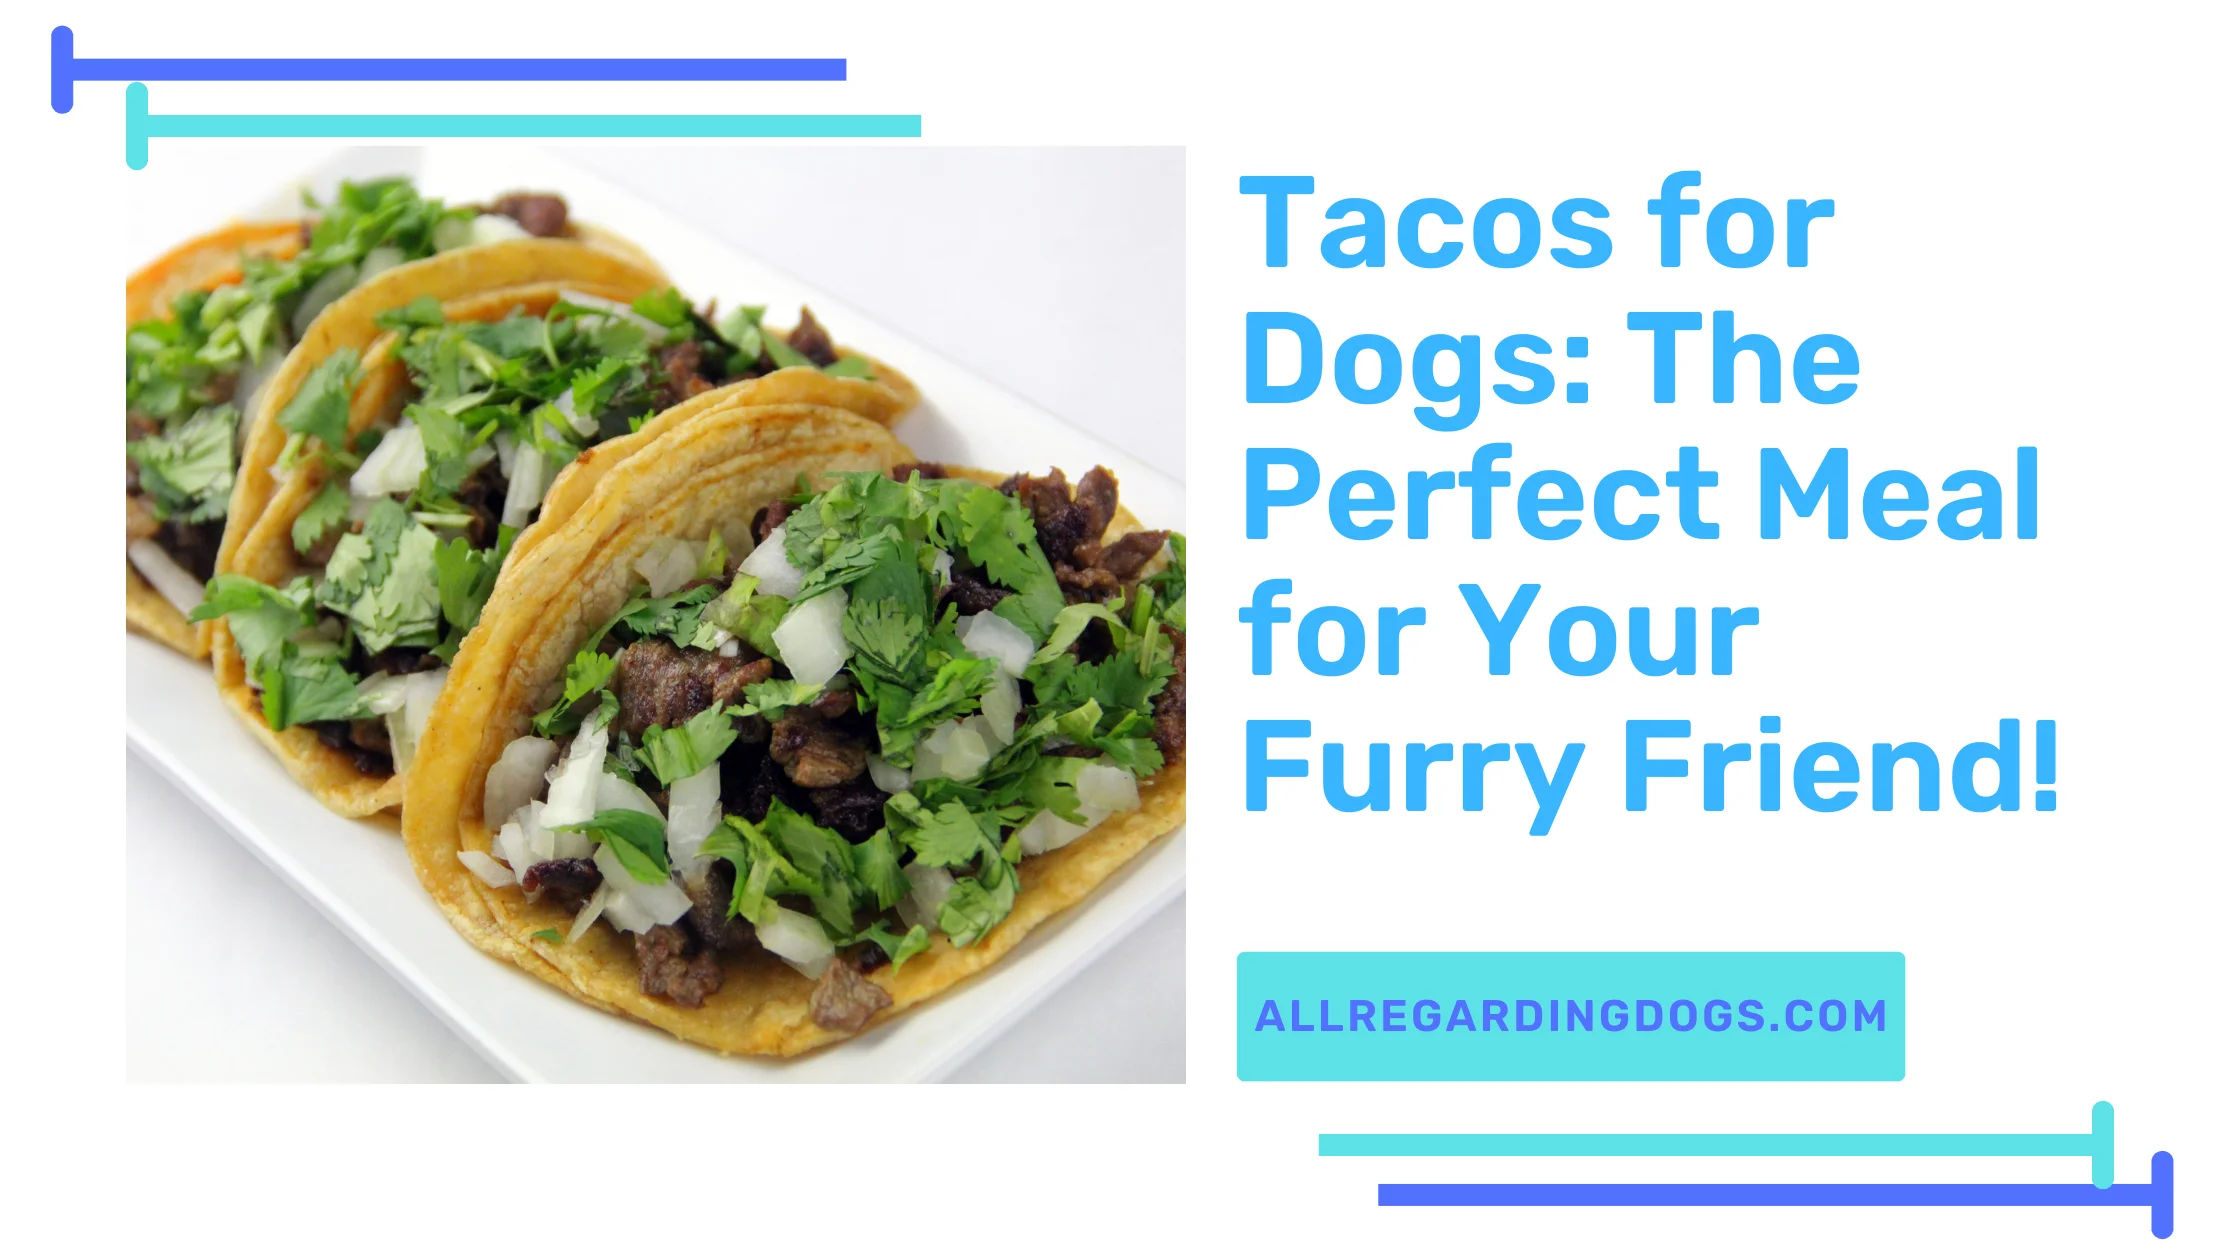 Tacos for Dogs